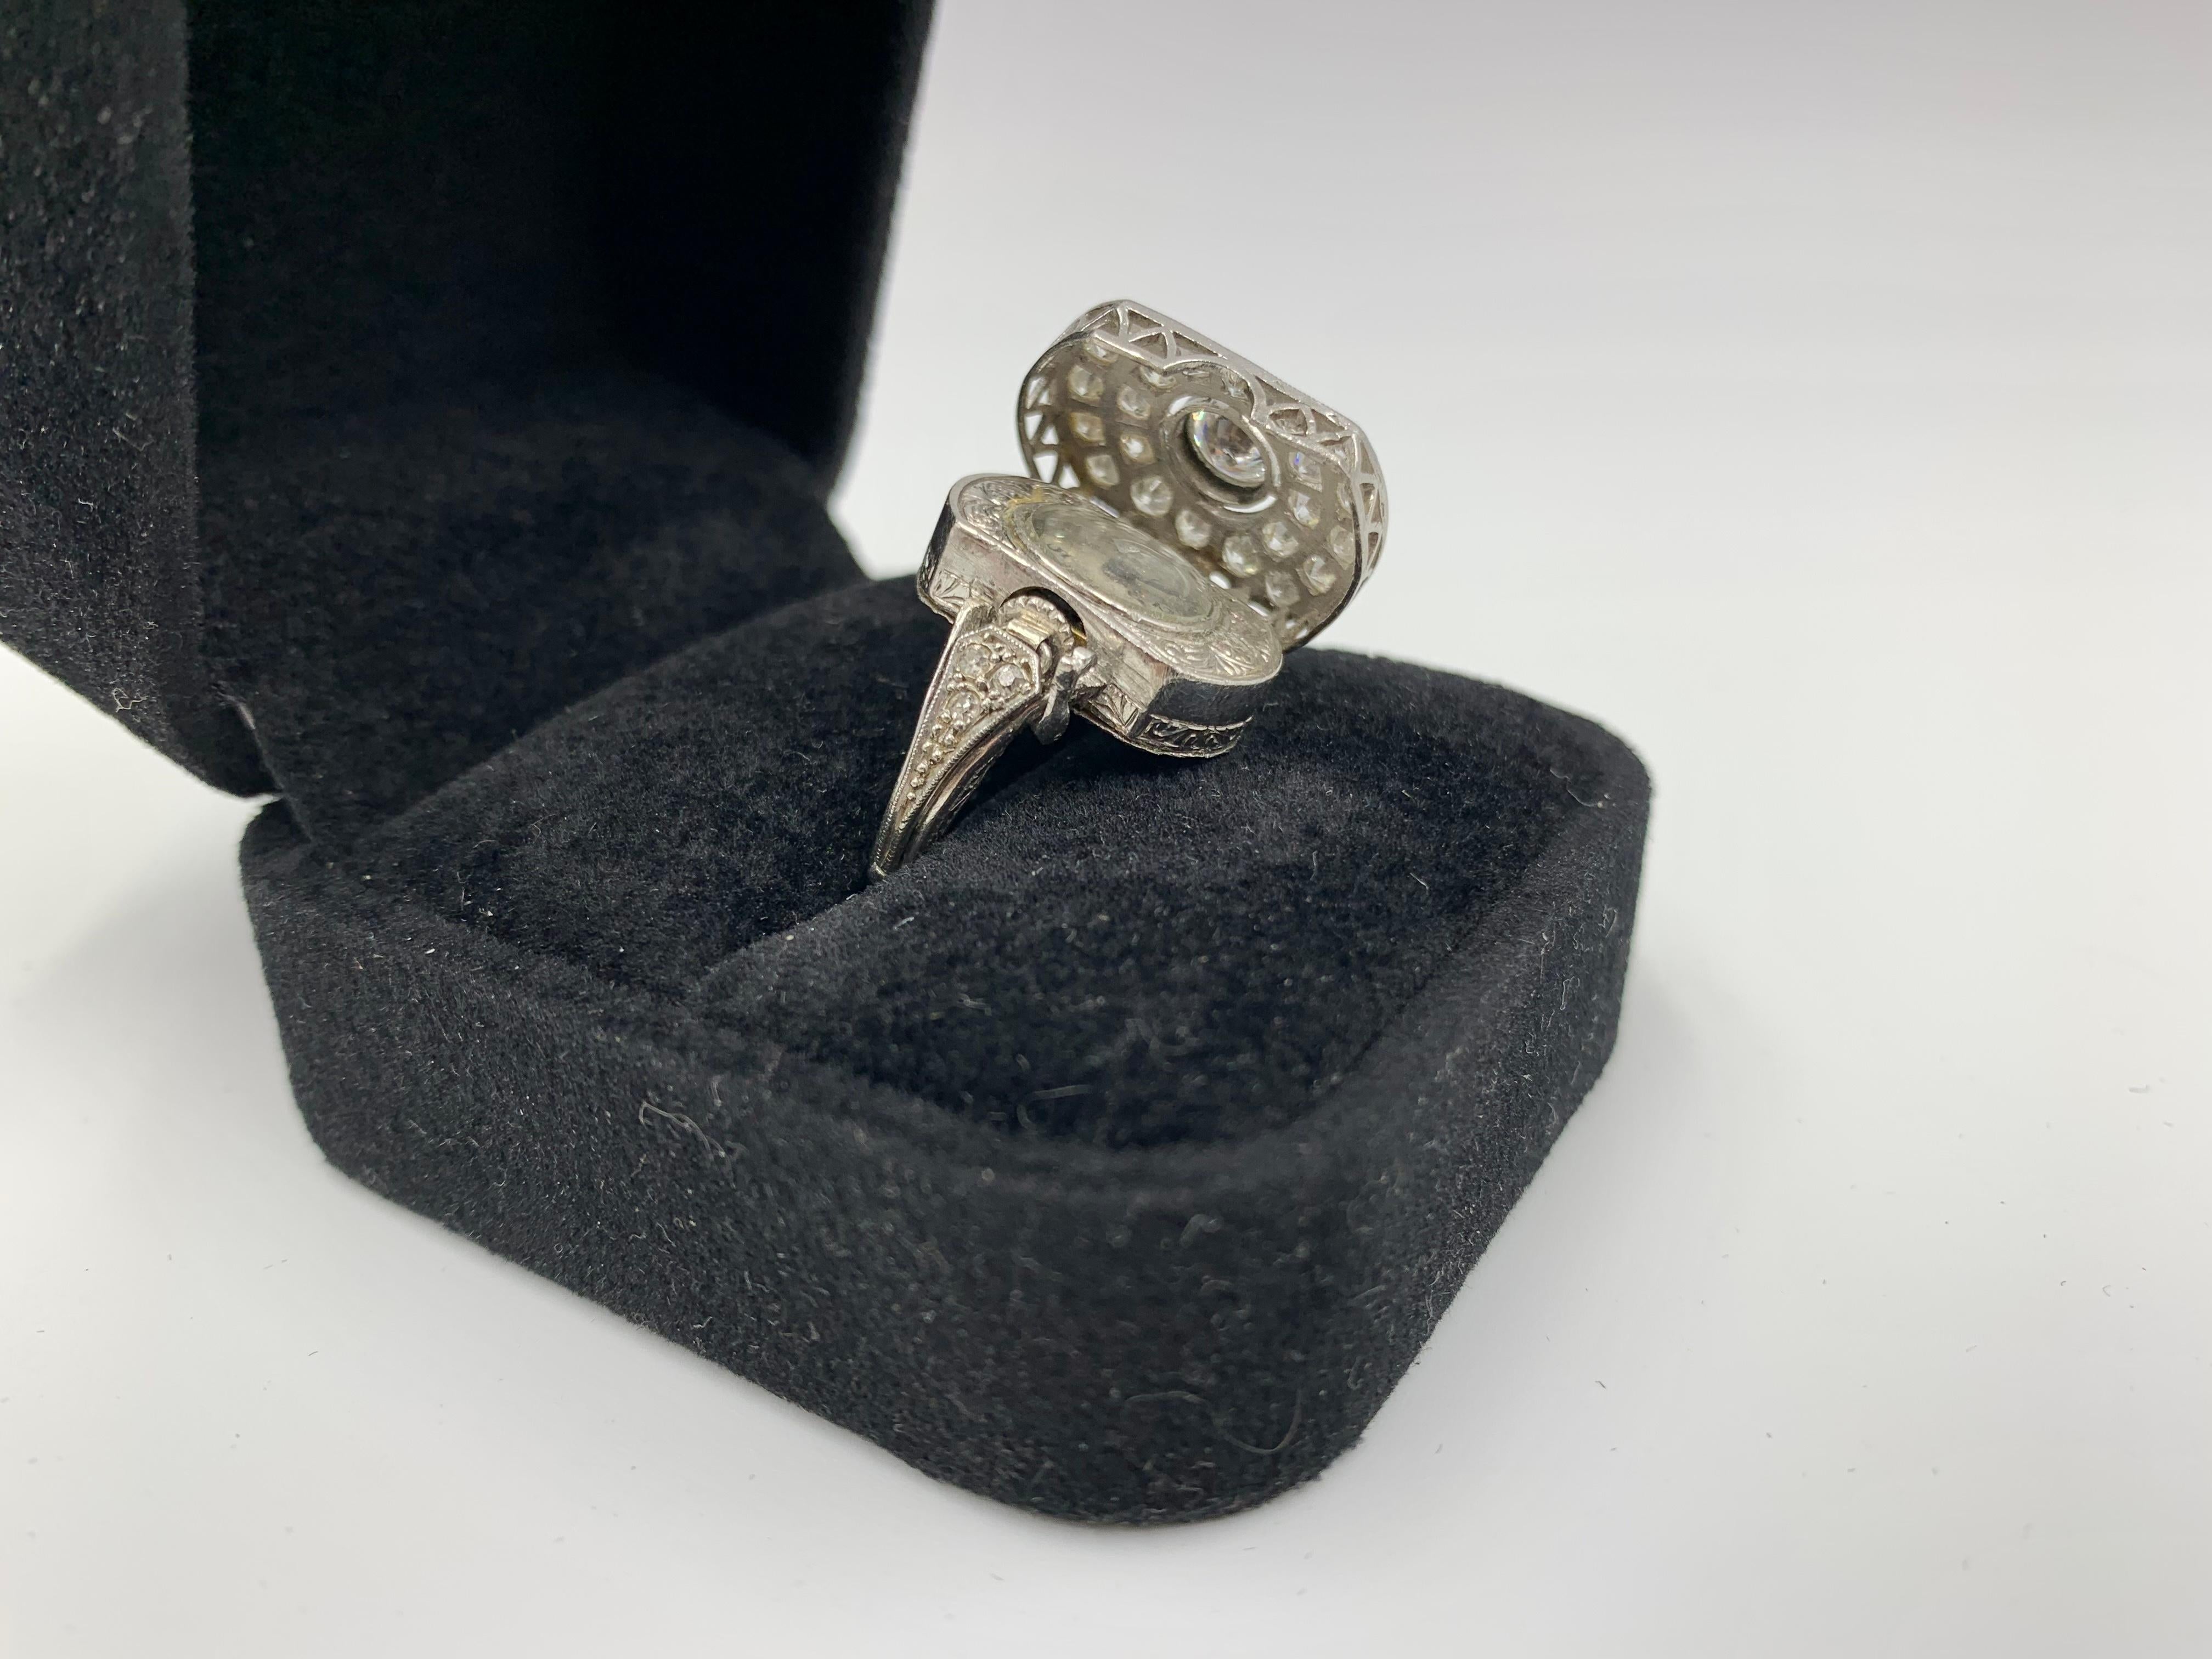 Rare Art Deco 2.30 TCW Diamond 14K White Gold Cocktail Ring with Concealed Watch For Sale 6